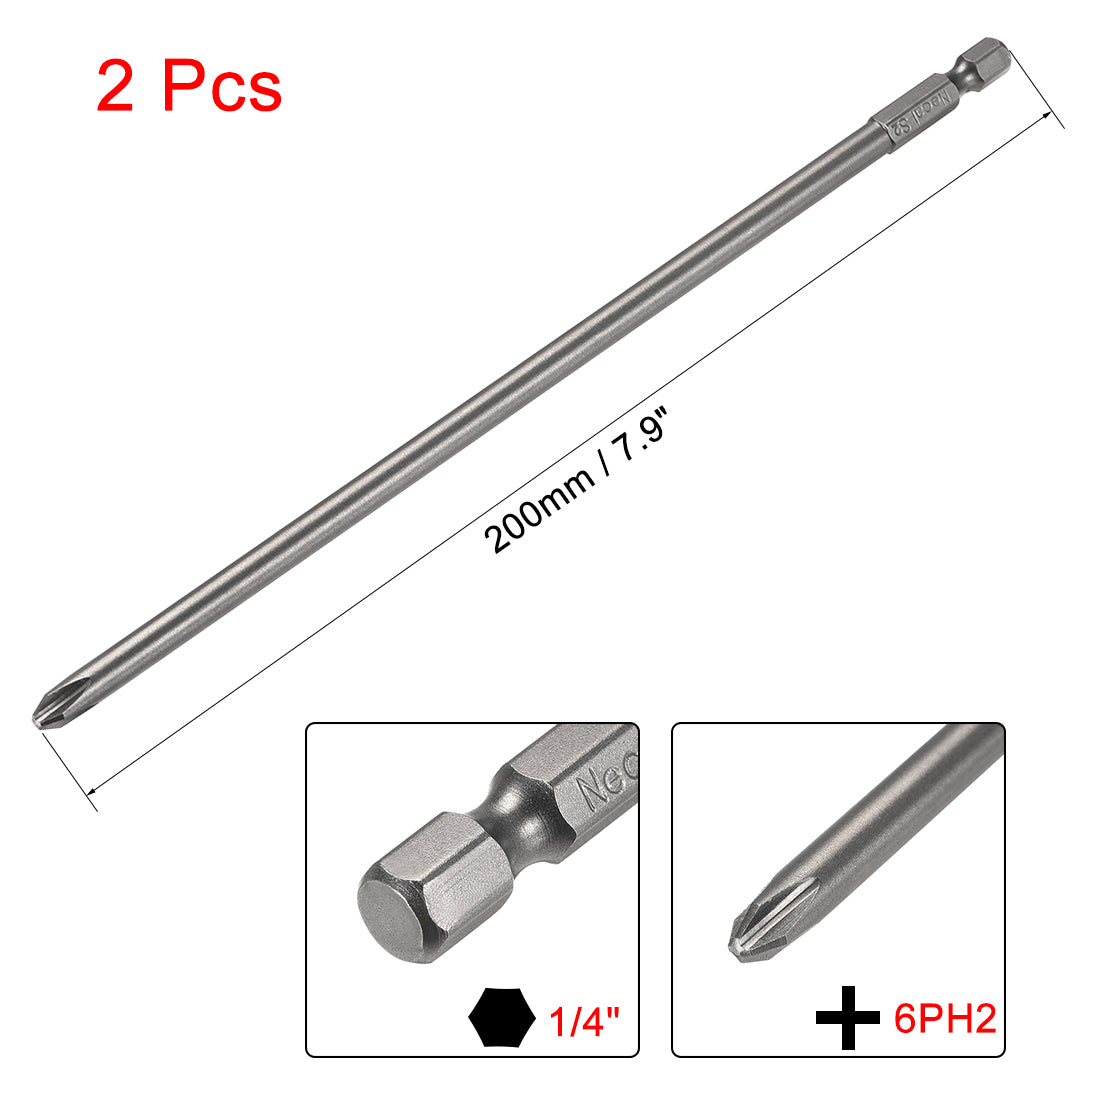 Uxcell Uxcell 1/4-Inch Hex Shank 200mm Length Phillips Cross 6PH2 Magnetic Screw Driver S2 Screwdriver Bits 2pcs